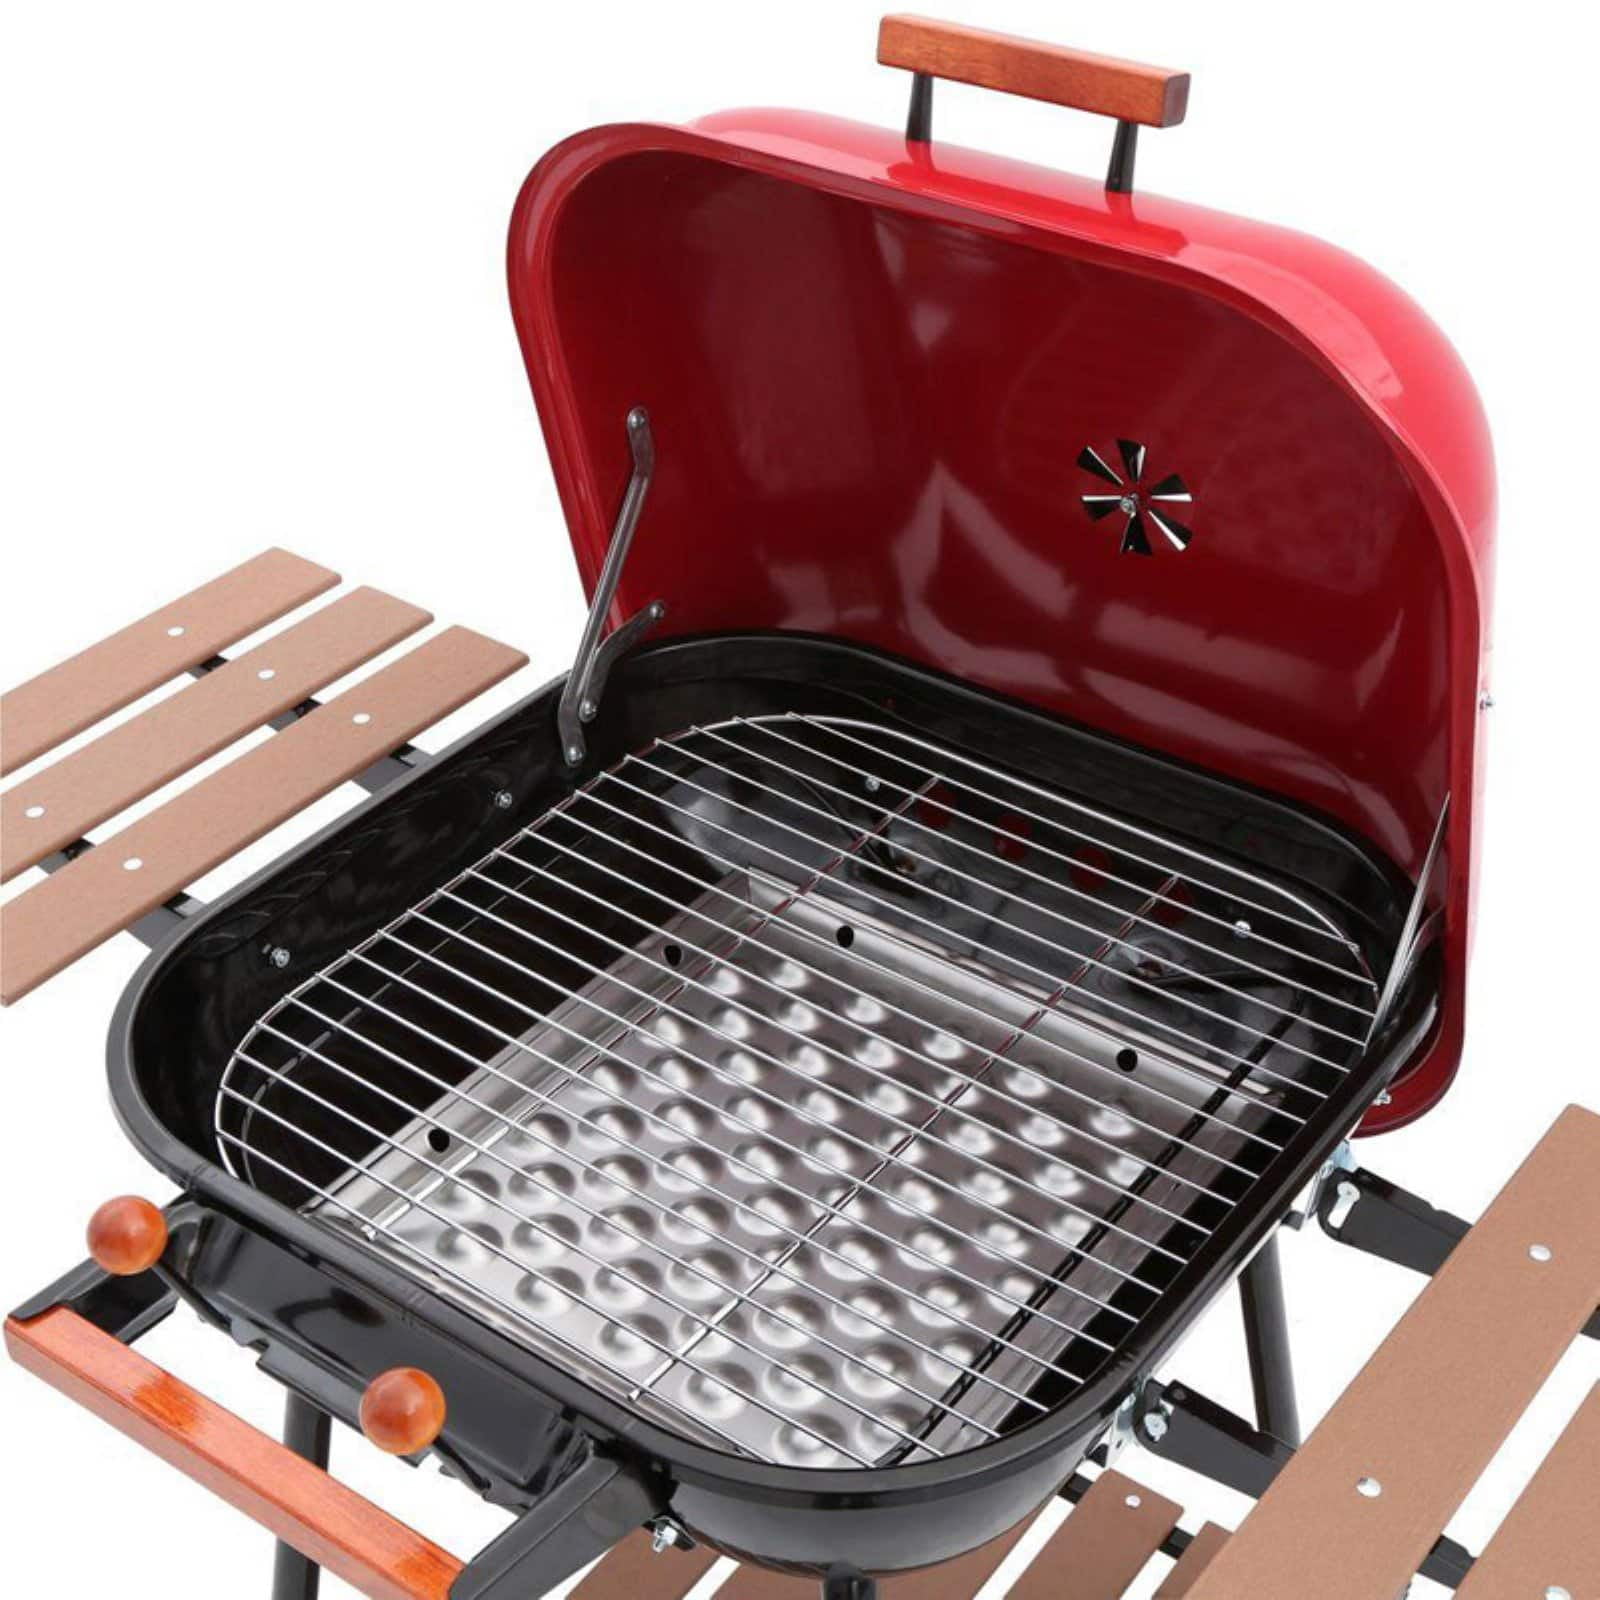 Americana Charcoal BBQ Grill with Adjustable Cooking Grate and Side Table